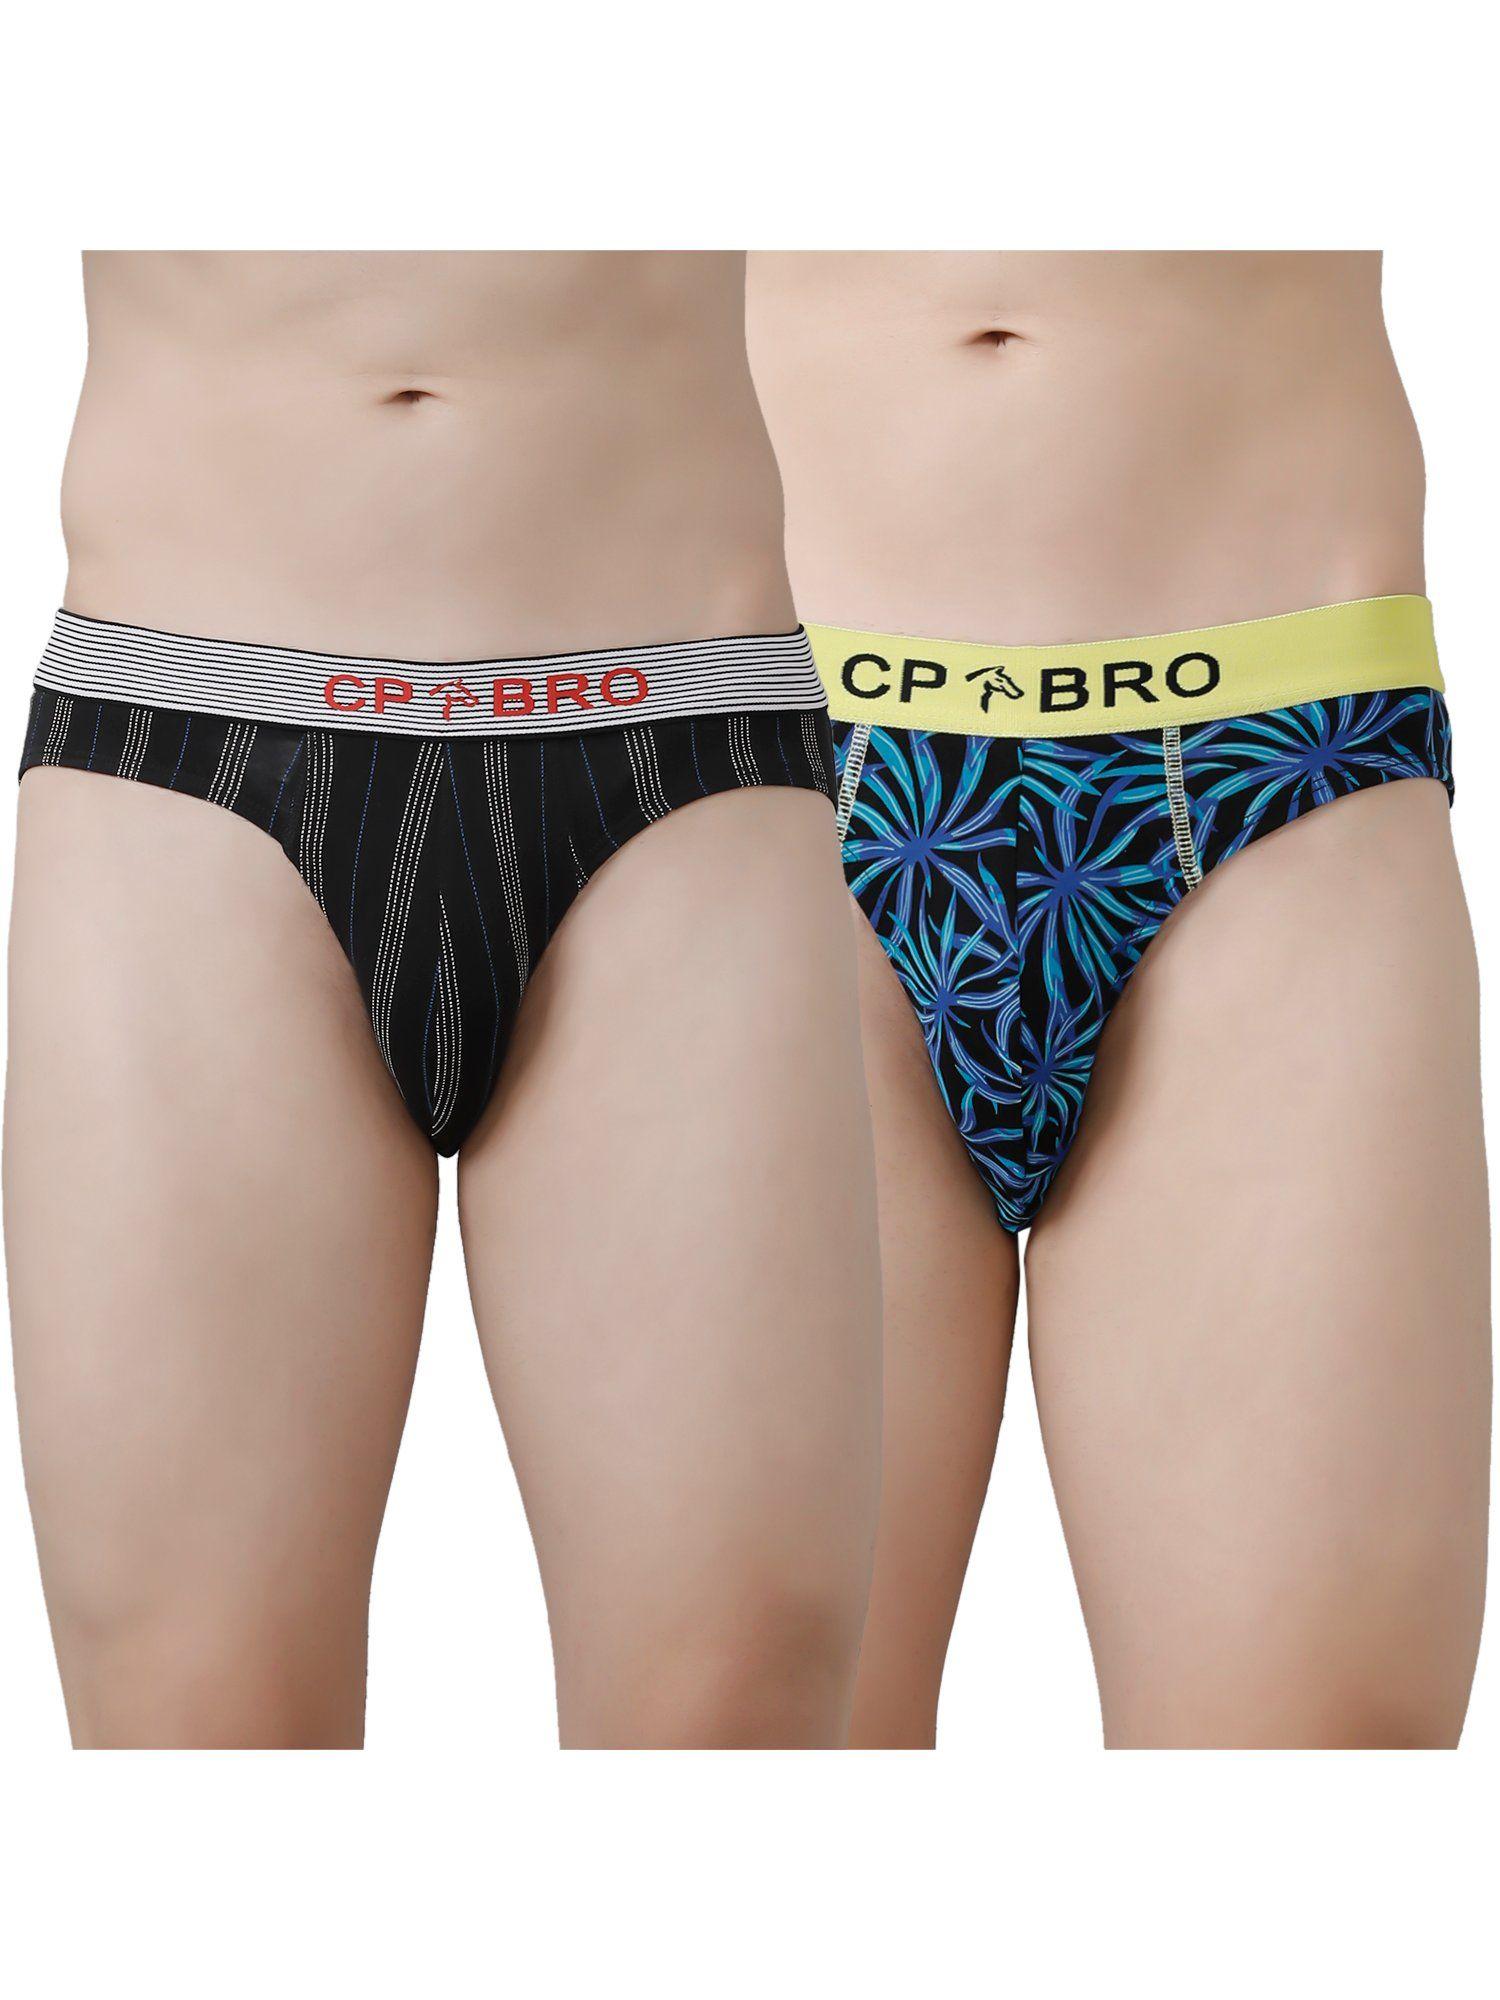 printed briefs with exposed waistband value - black stripe & blue leaf (pack of 2)